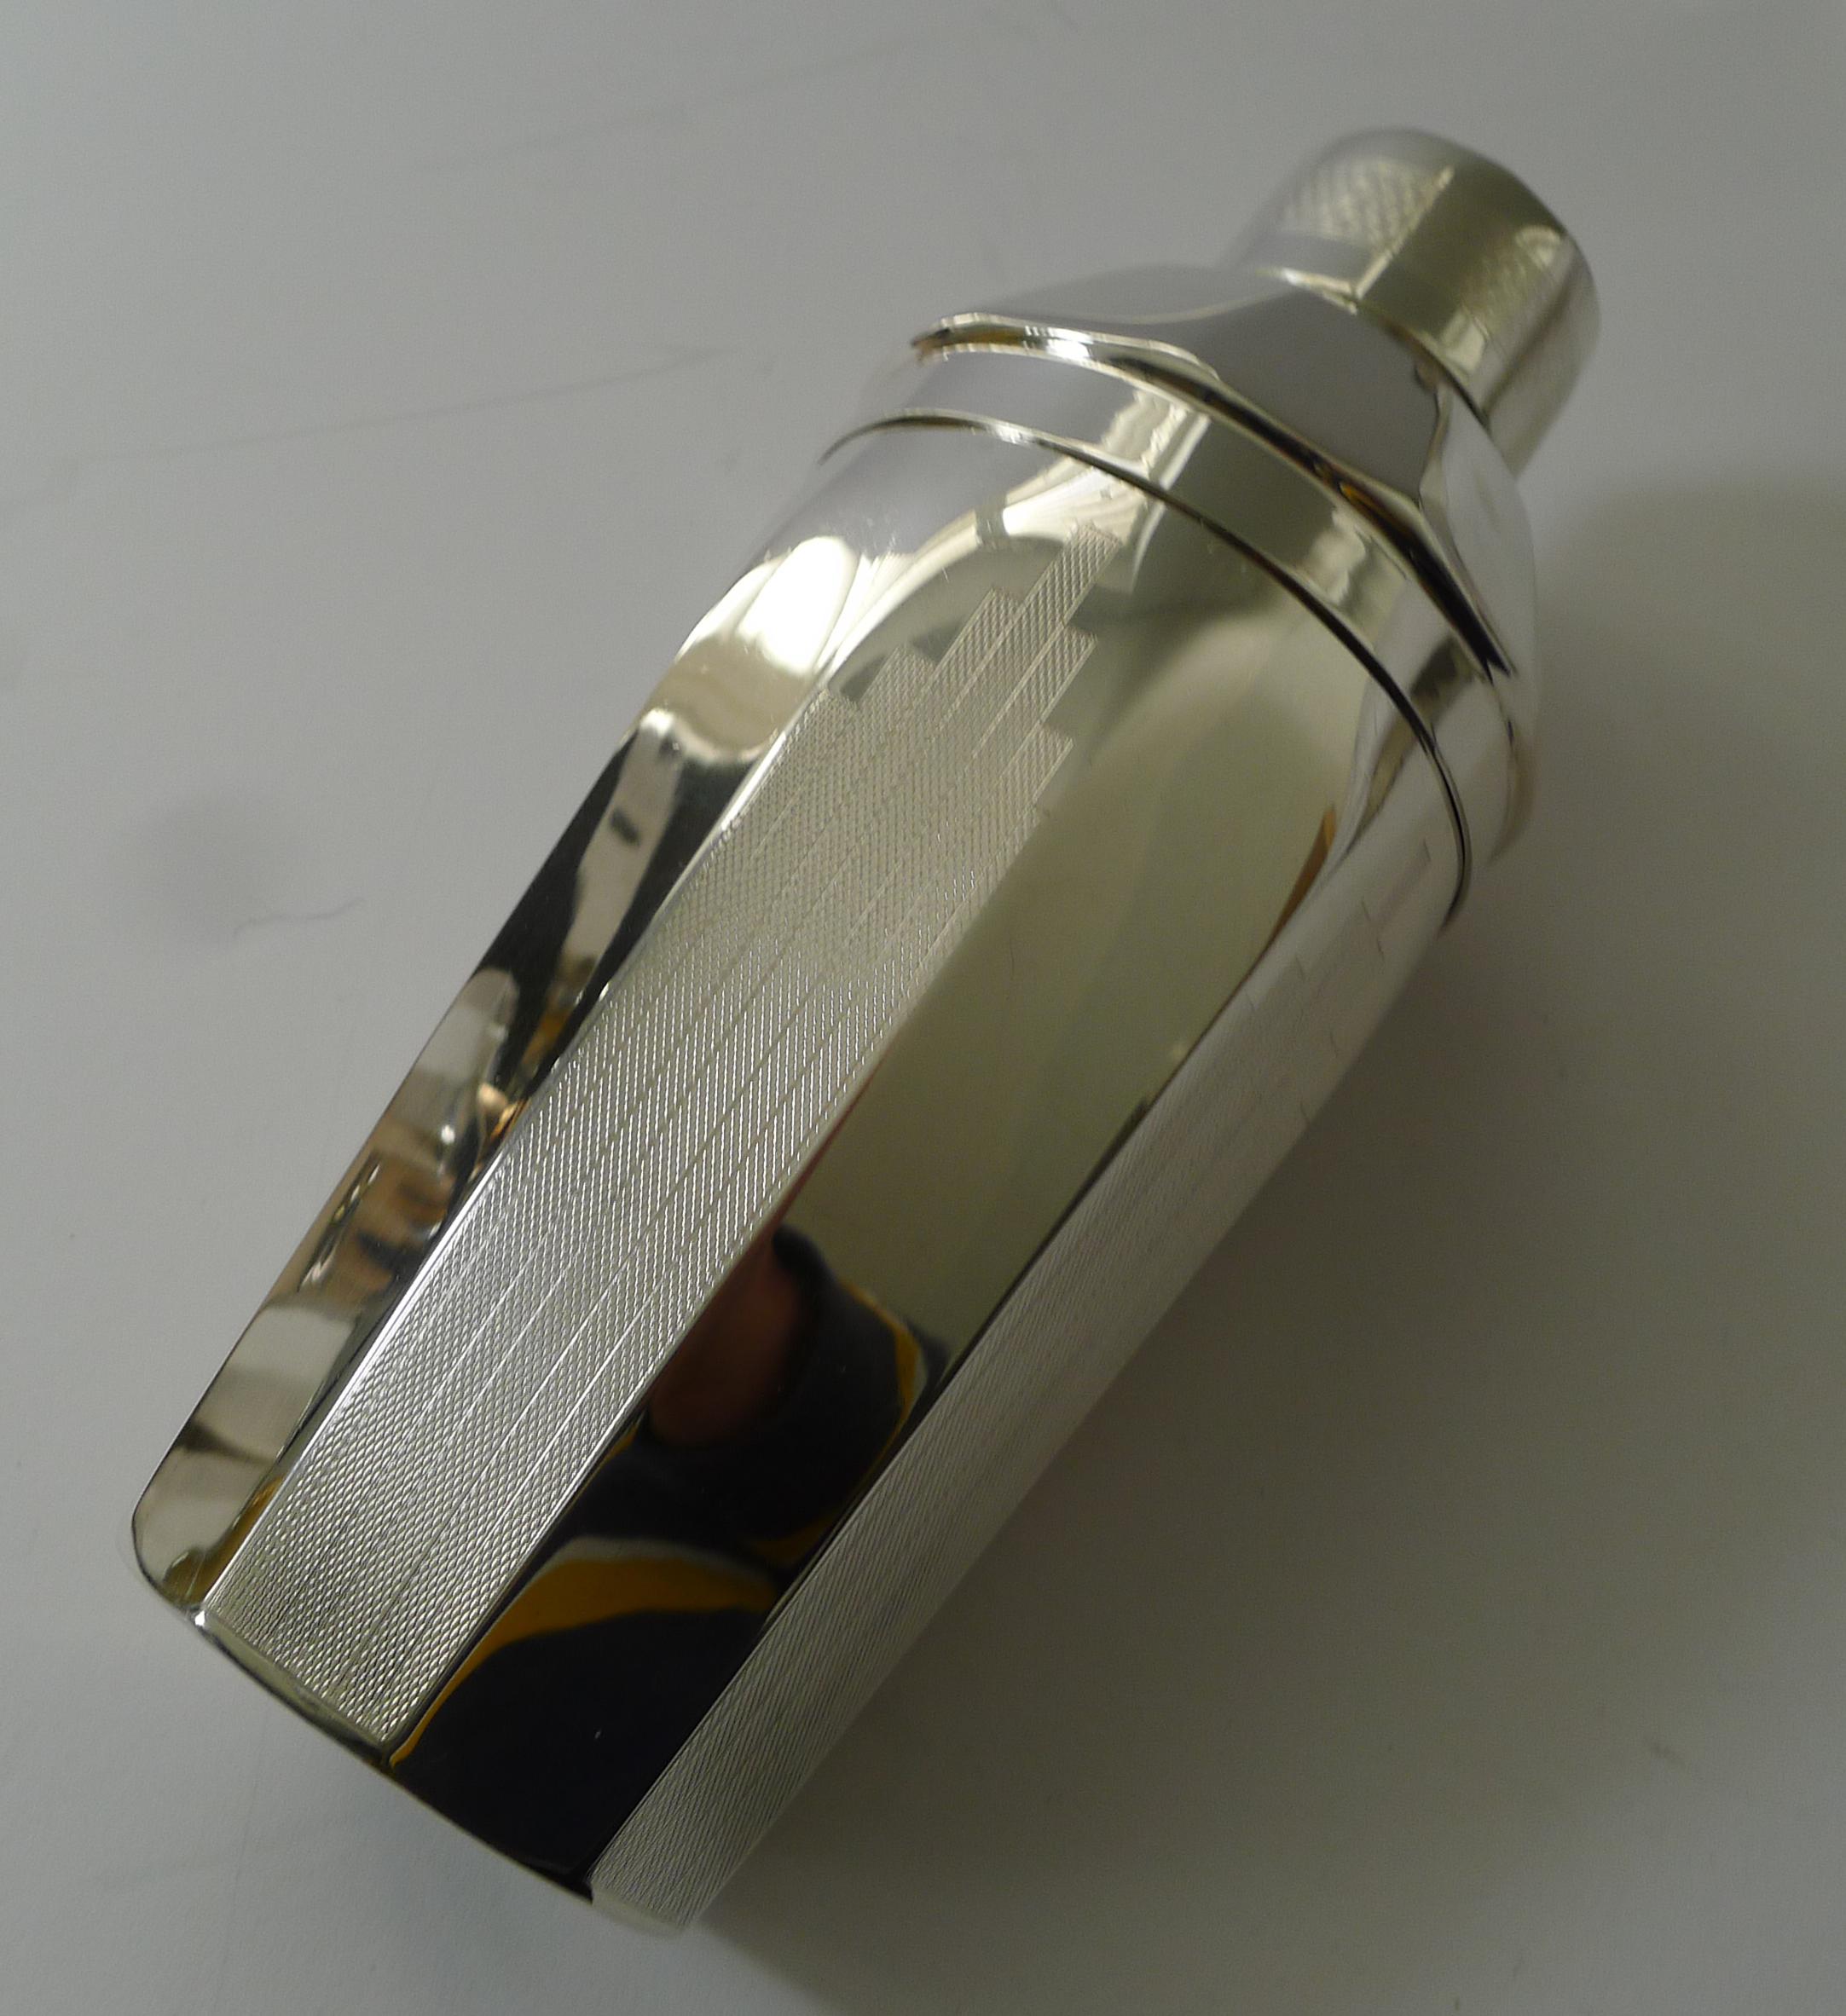 A really unusual vintage silver plated cocktail shaker by the creme de la creme of silver plate manufacturers, Elkington and Co.

The set comprises a very stylish cocktail shaker with a skyscraper engine turned design on alternate facets of the